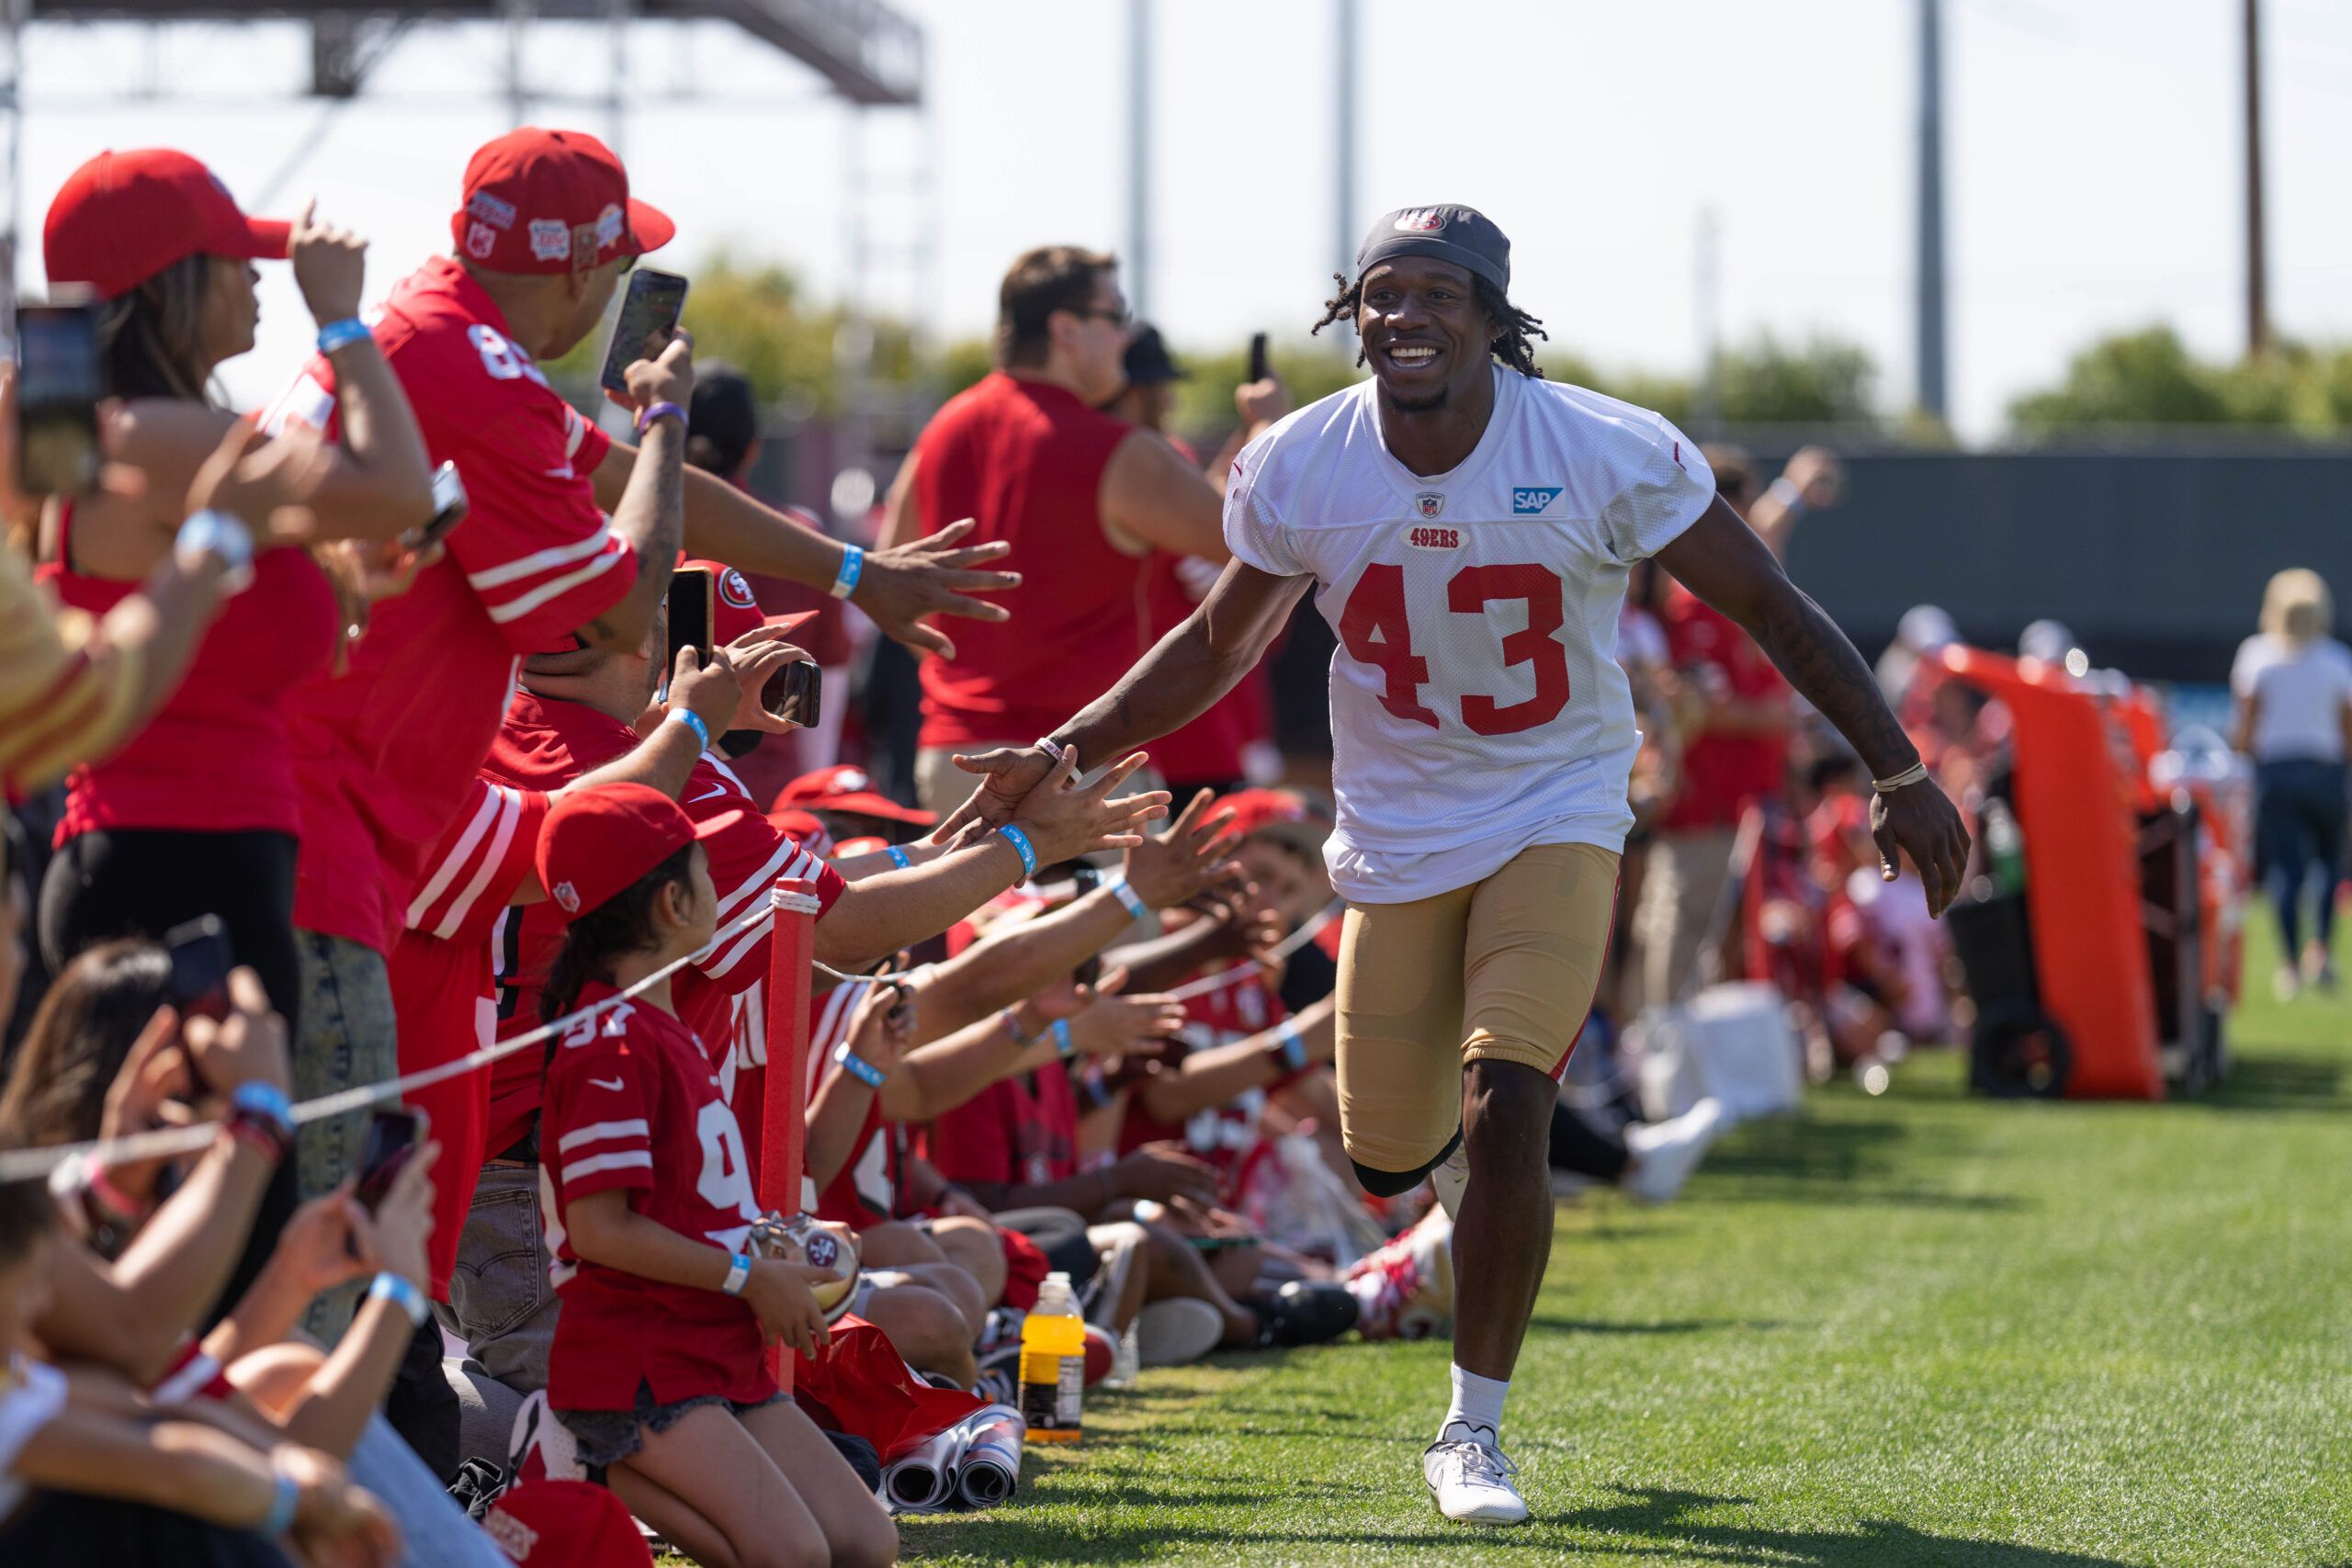 49ers open practice training camp dates announced